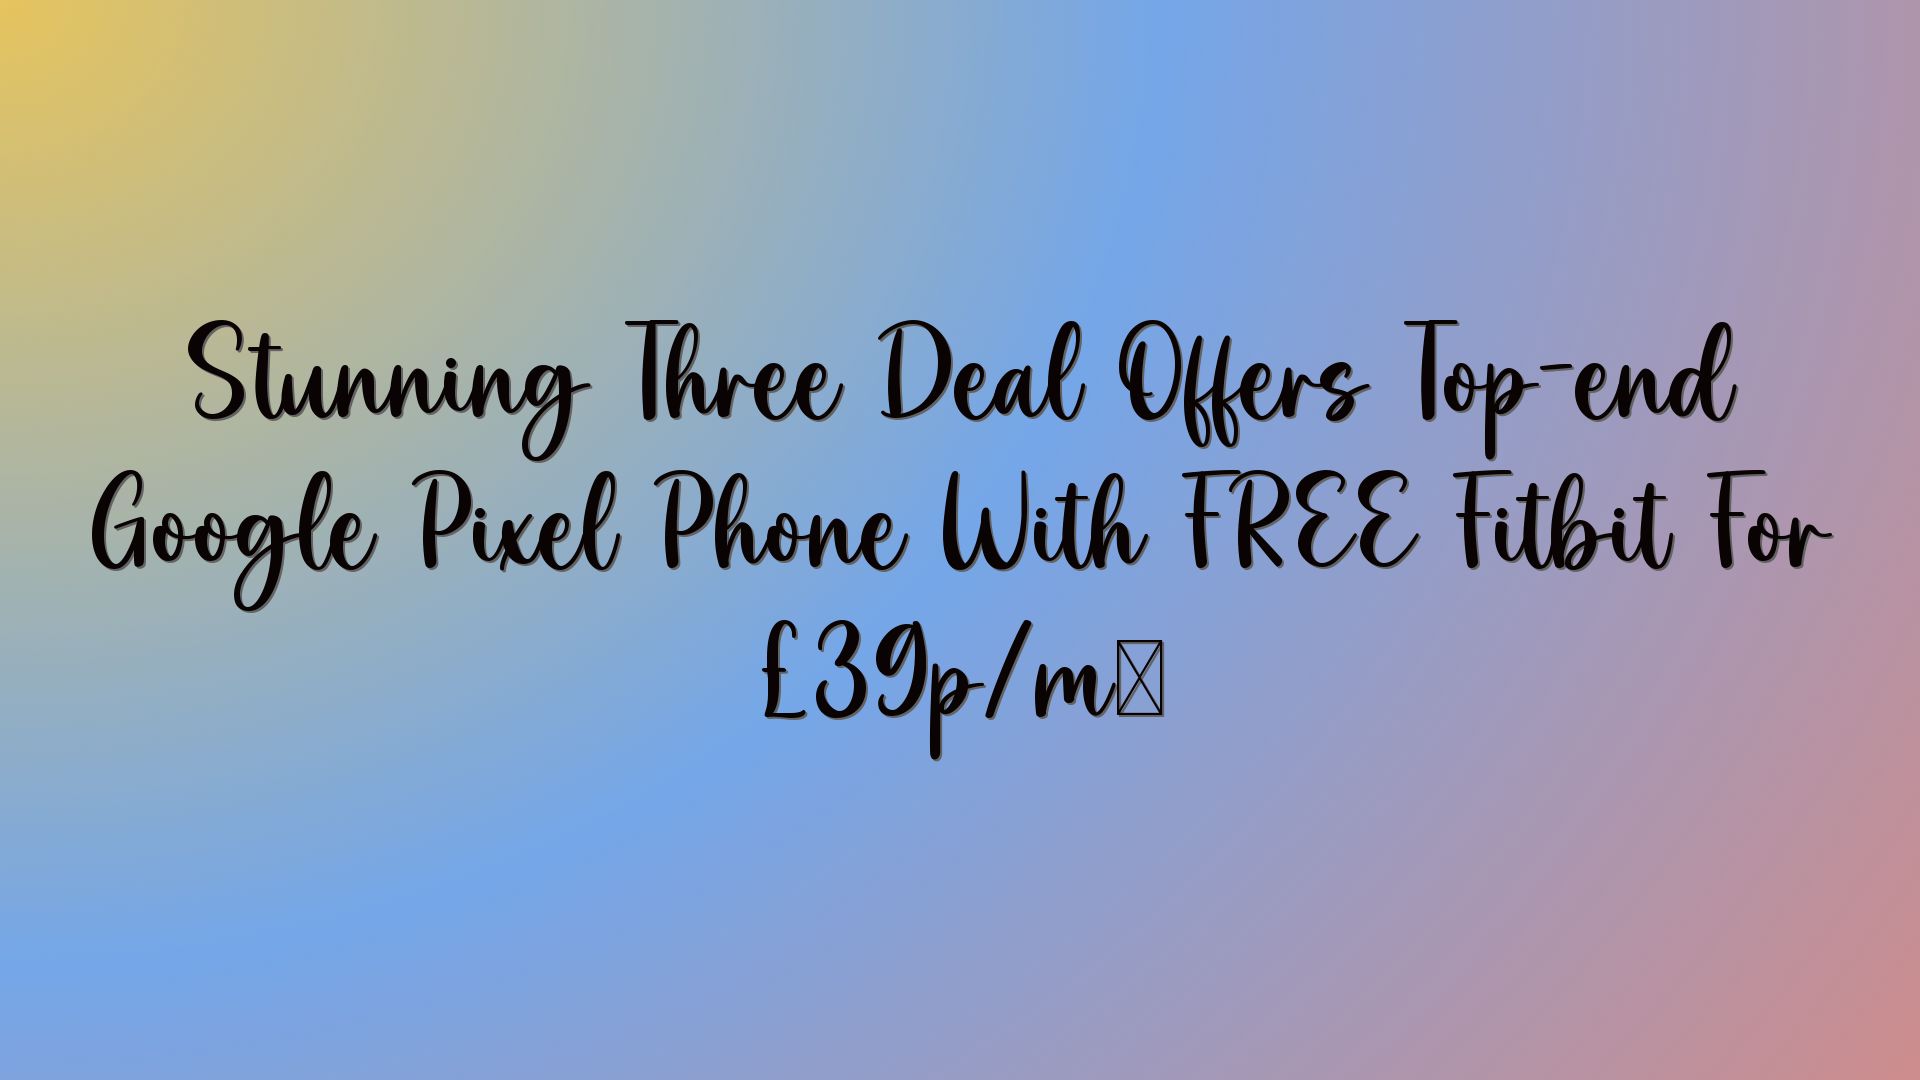 Stunning Three Deal Offers Top-end Google Pixel Phone With FREE Fitbit For £39p/m…